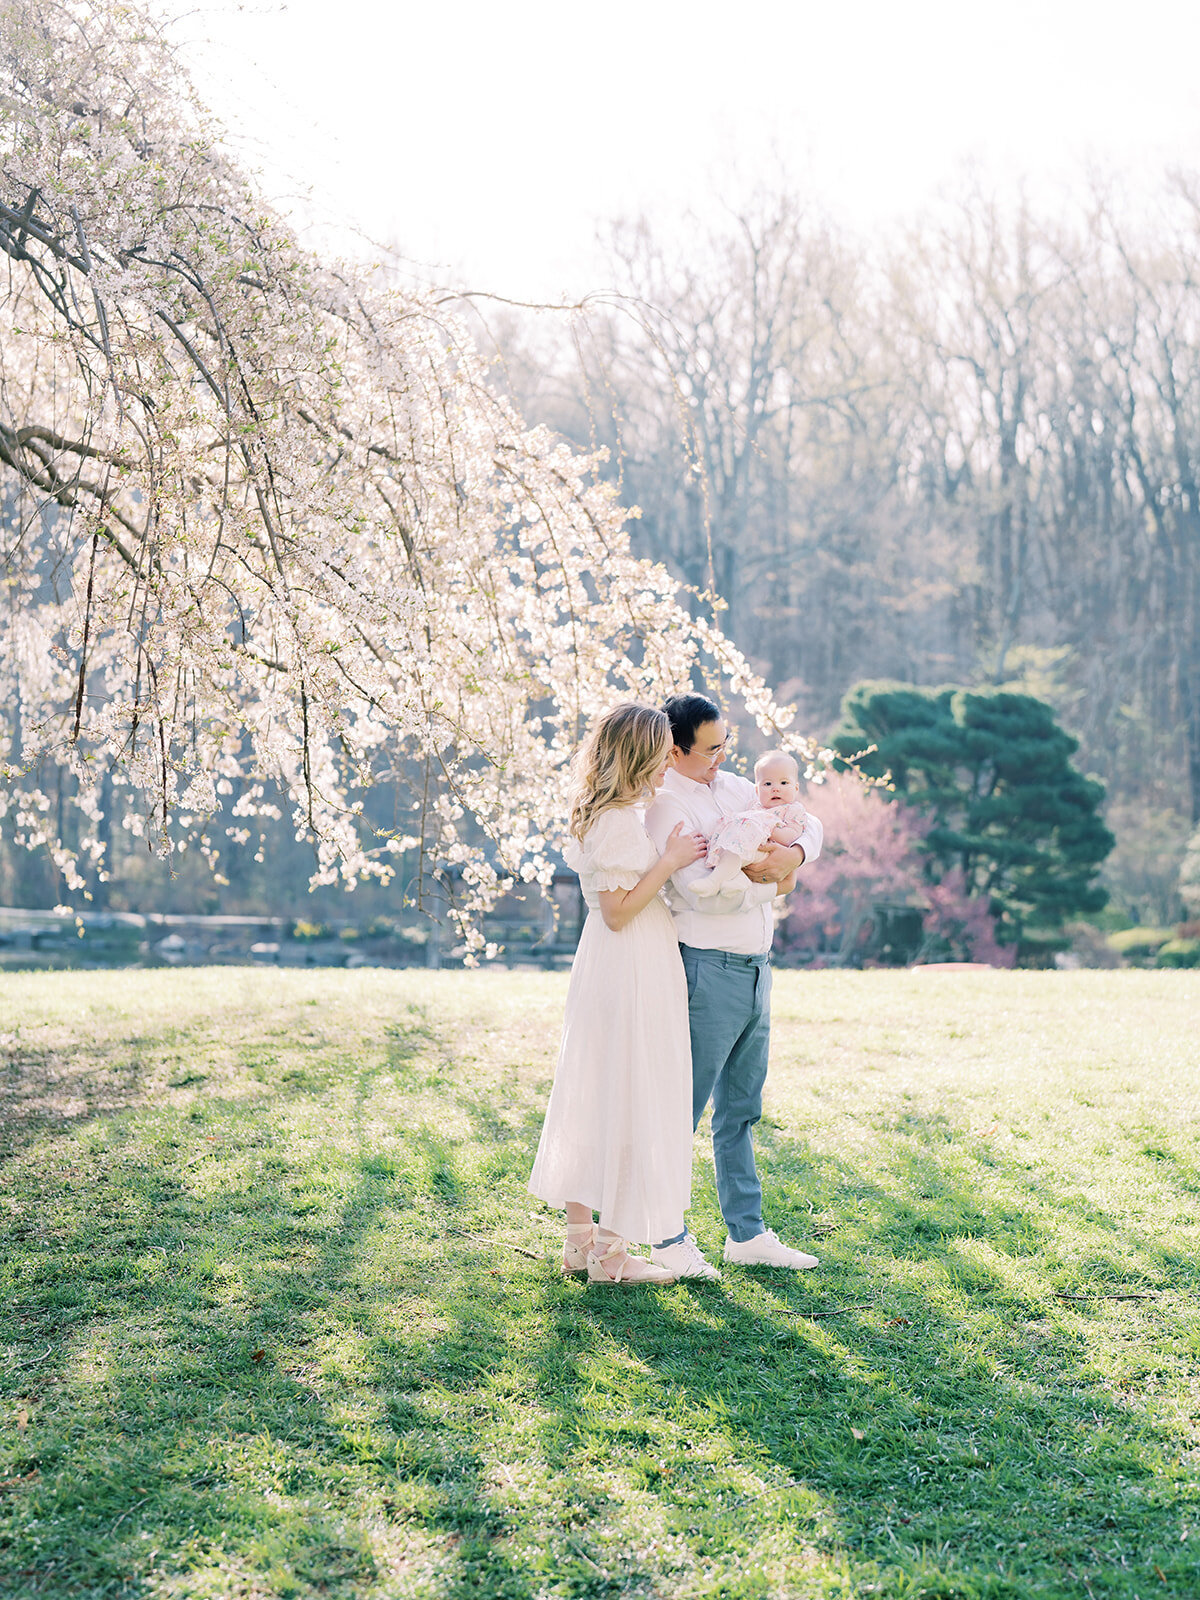 Father and mother stand together holding their baby girl in front of cherry blossom tree.